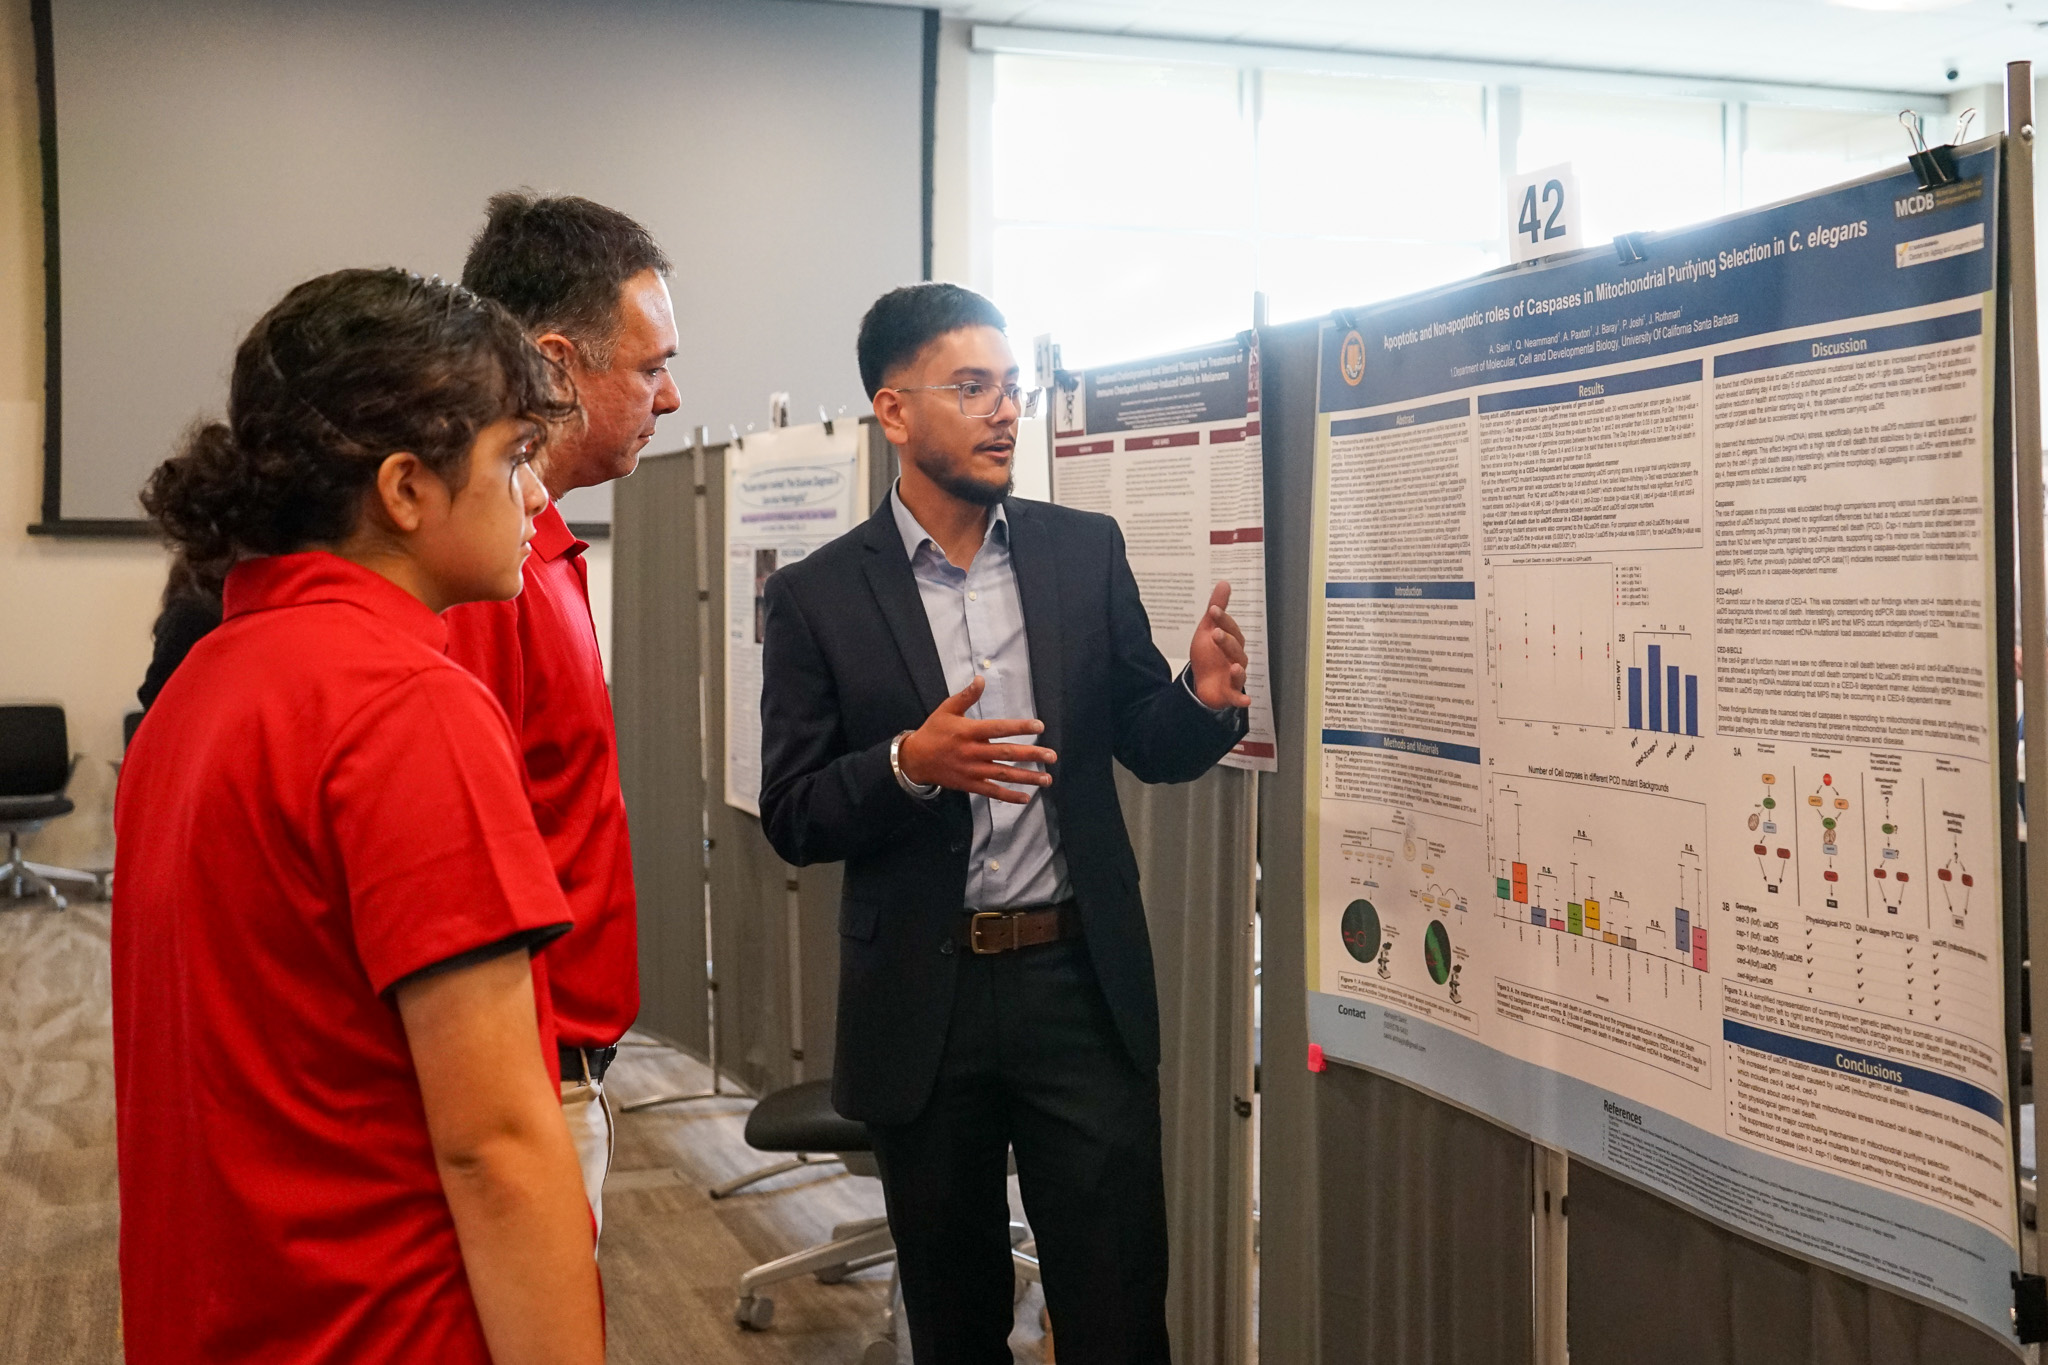 CHSU Annual Research Day Highlights Local Research